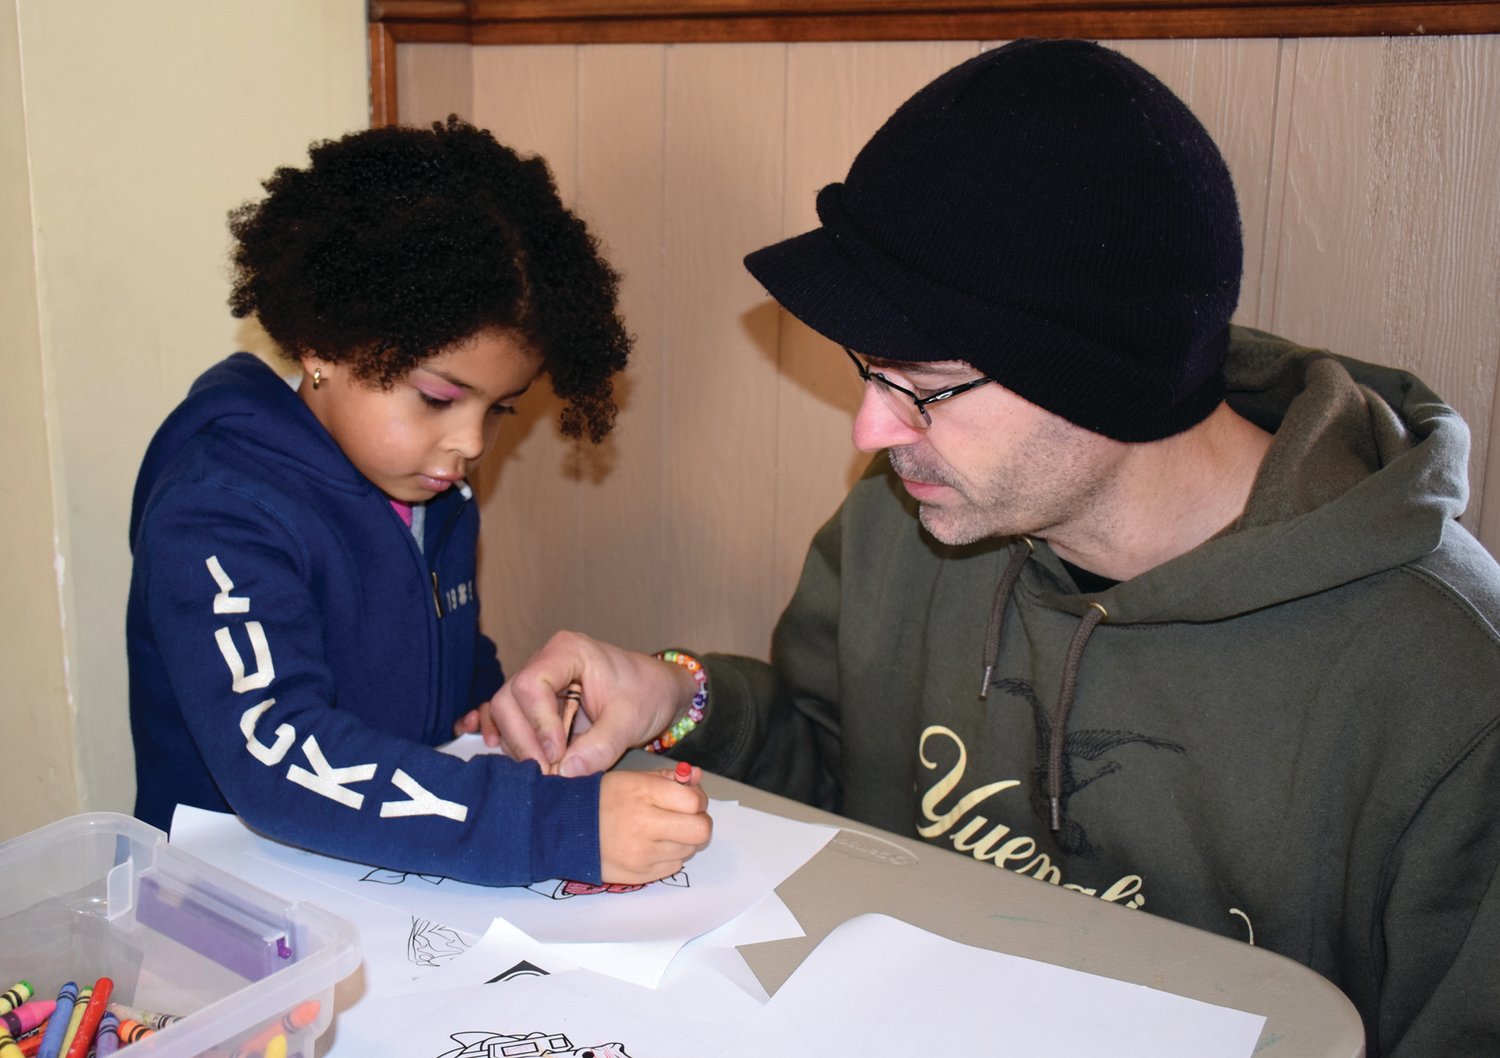 Emma and Josh Seaton, of Telford, work on a coloring page at the Jan. 28 winter market, a “Winter Wanderland” celebration hosted by the Perkasie Towne Improvement Association.